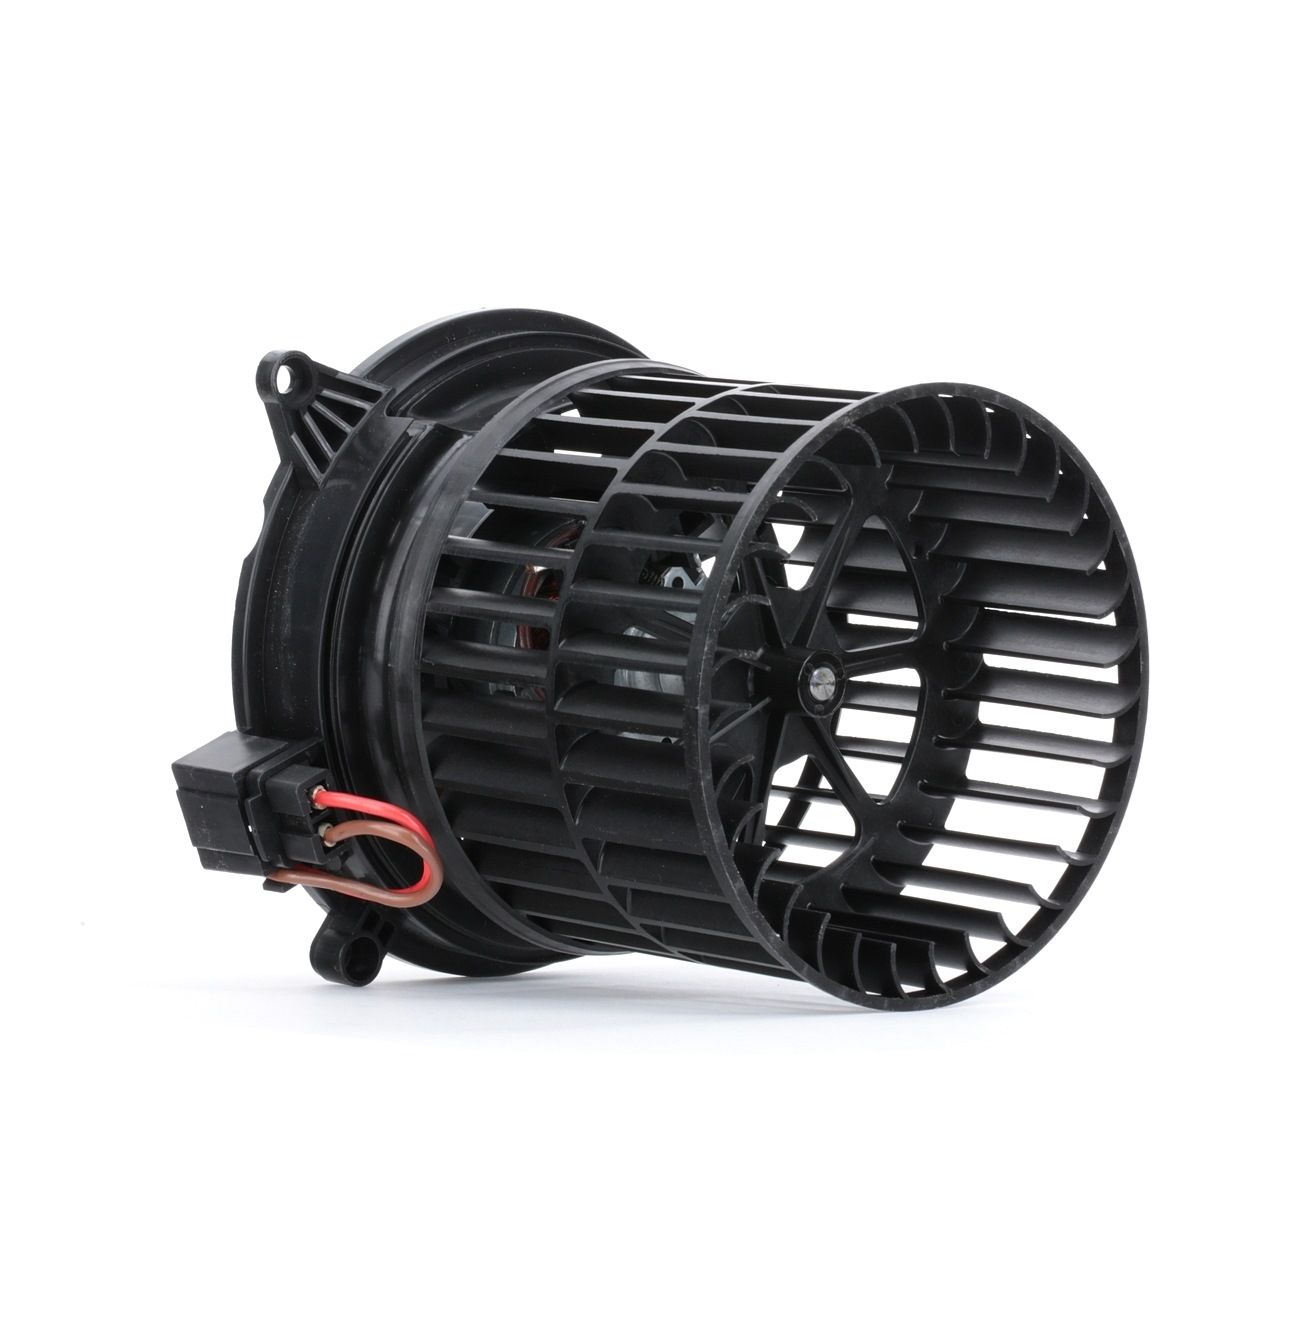 Ford MONDEO Cabin blower 14346969 RIDEX 2669I0123 online buy